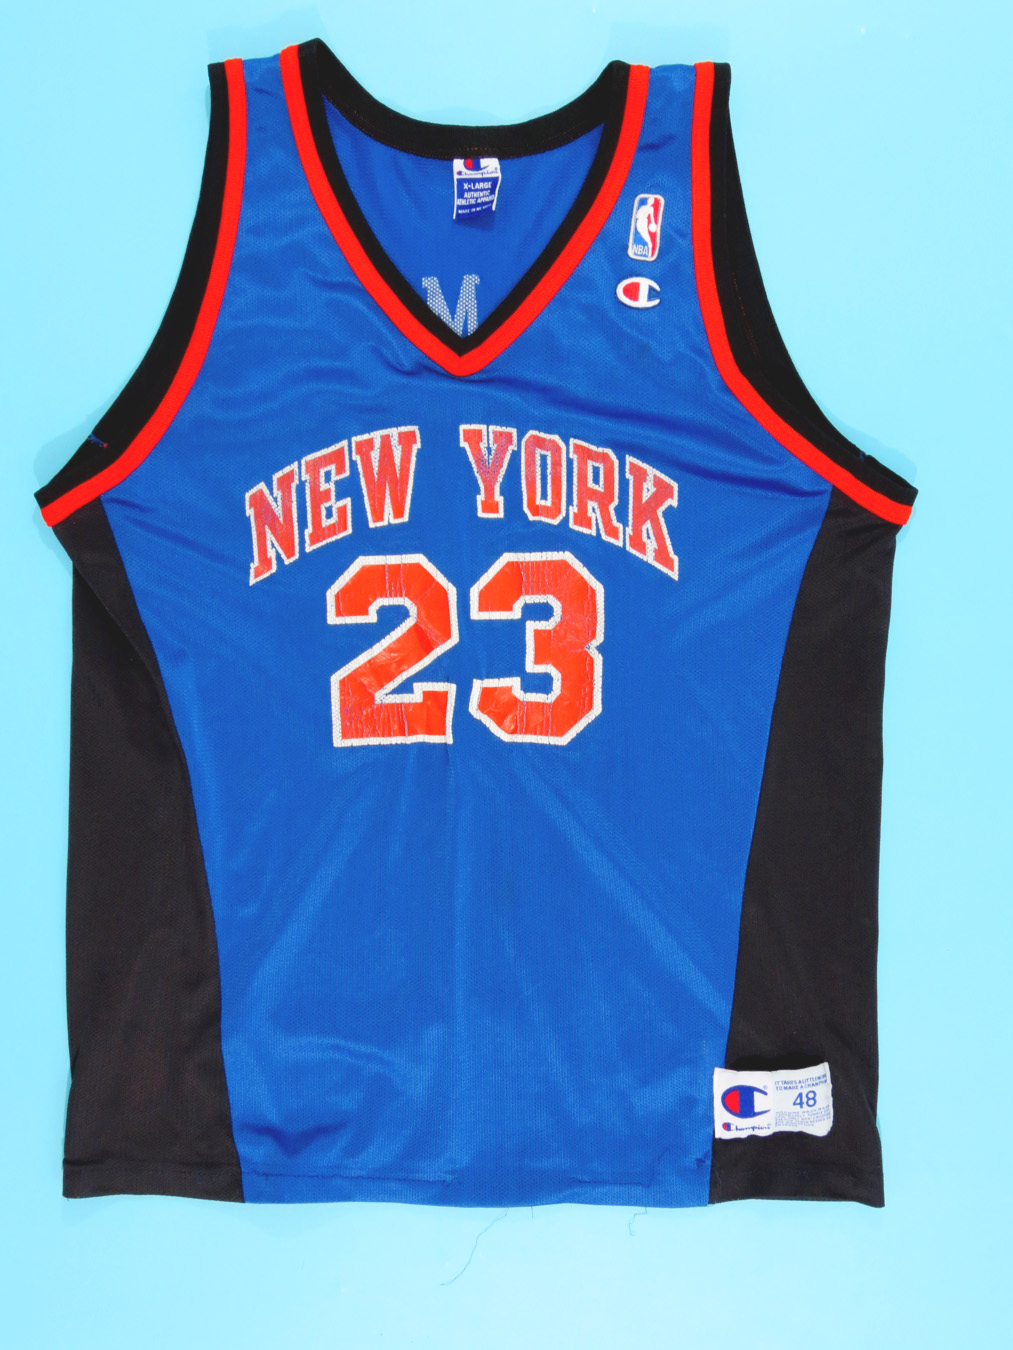 marcus camby jersey